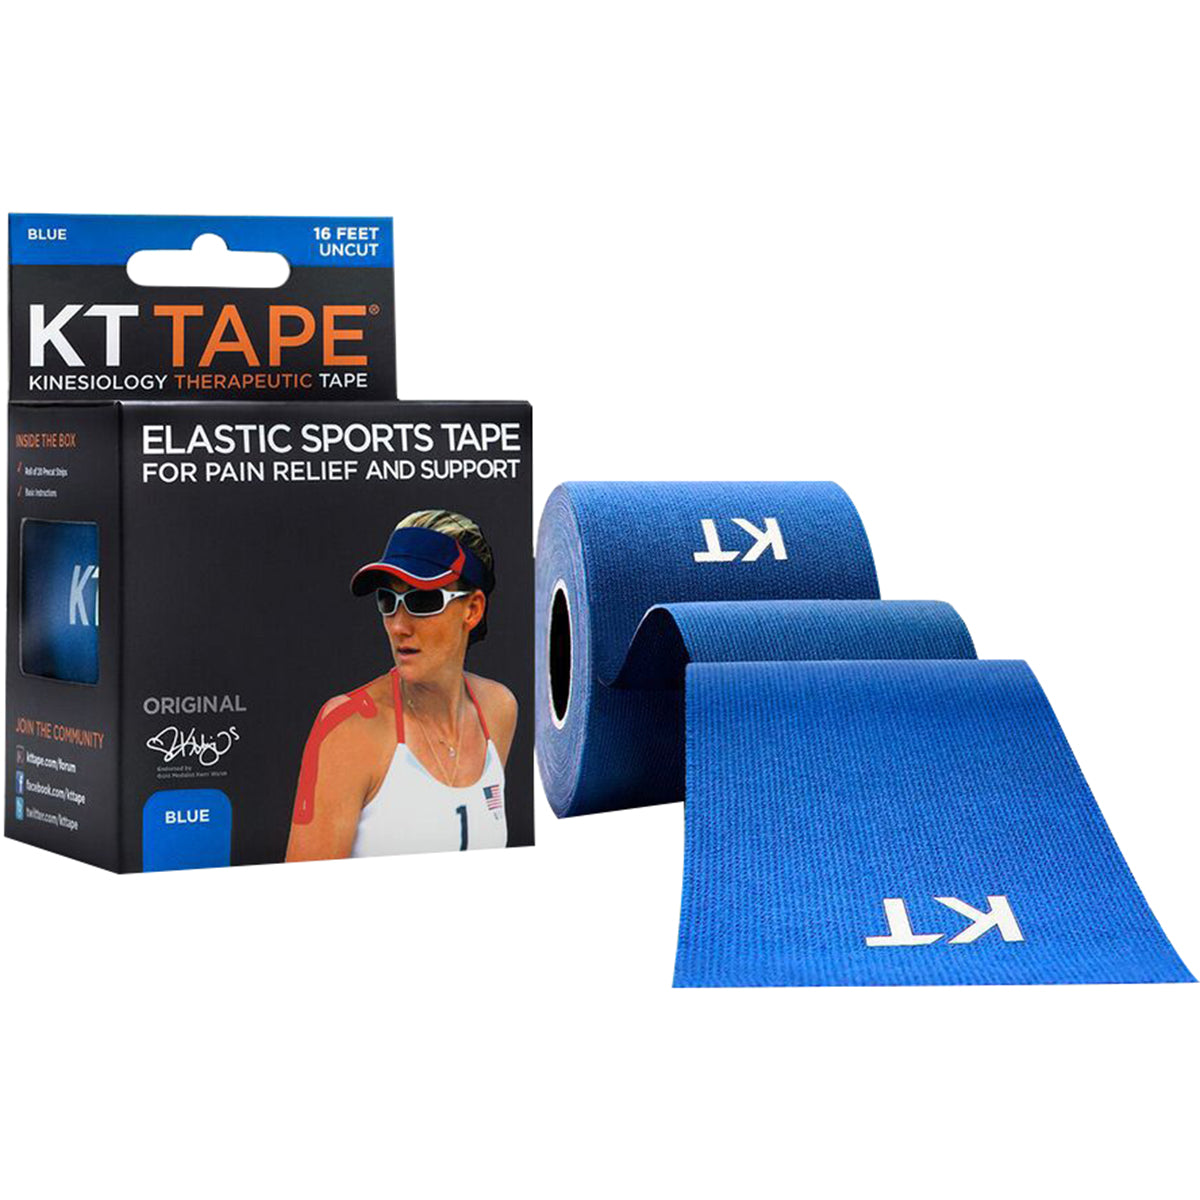 KT Tape Cotton 16 ft Uncut Kinesiology Therapeutic Elastic Sports Roll - Blue KT Tape